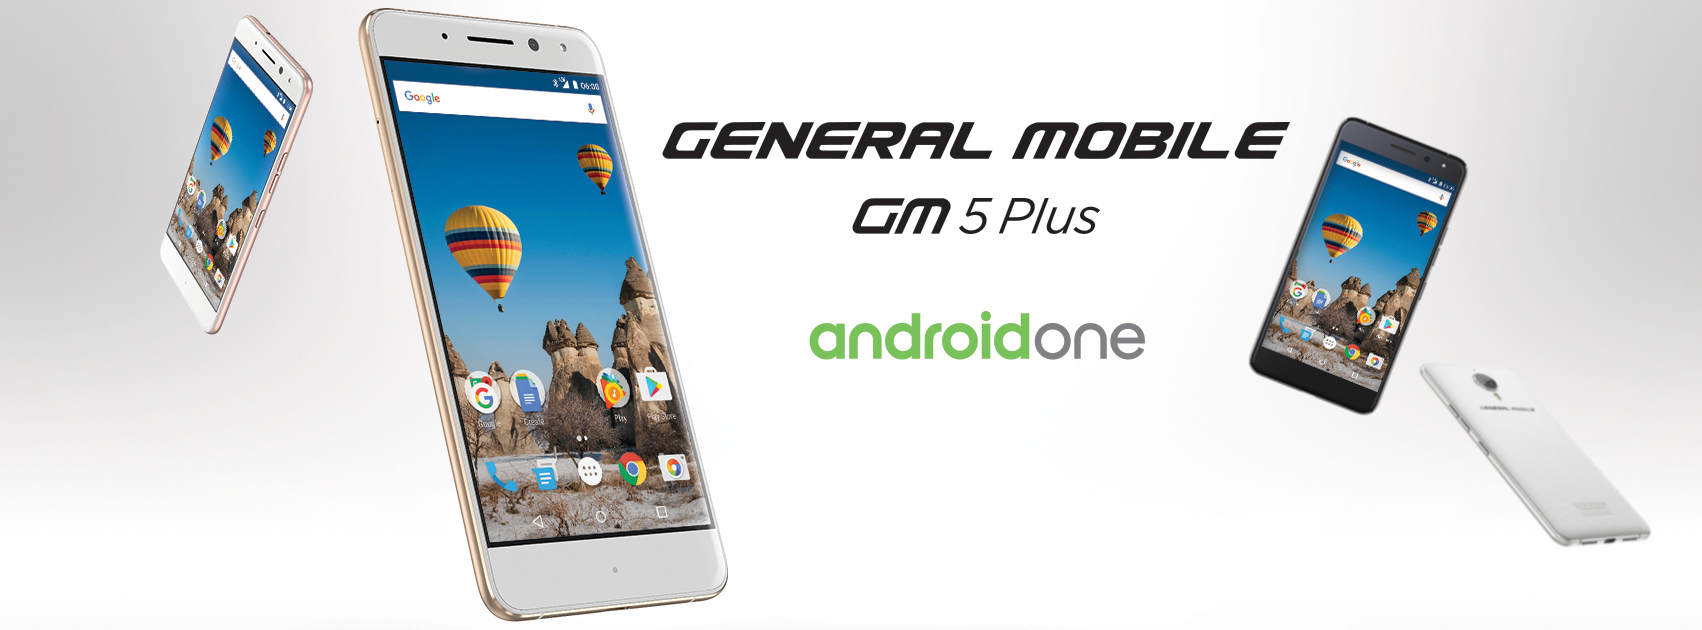 Official: General Mobile GM 5 Plus Android One Smartphone Launched in Nepal – Available for Pre-Booking at Rs. 24,999